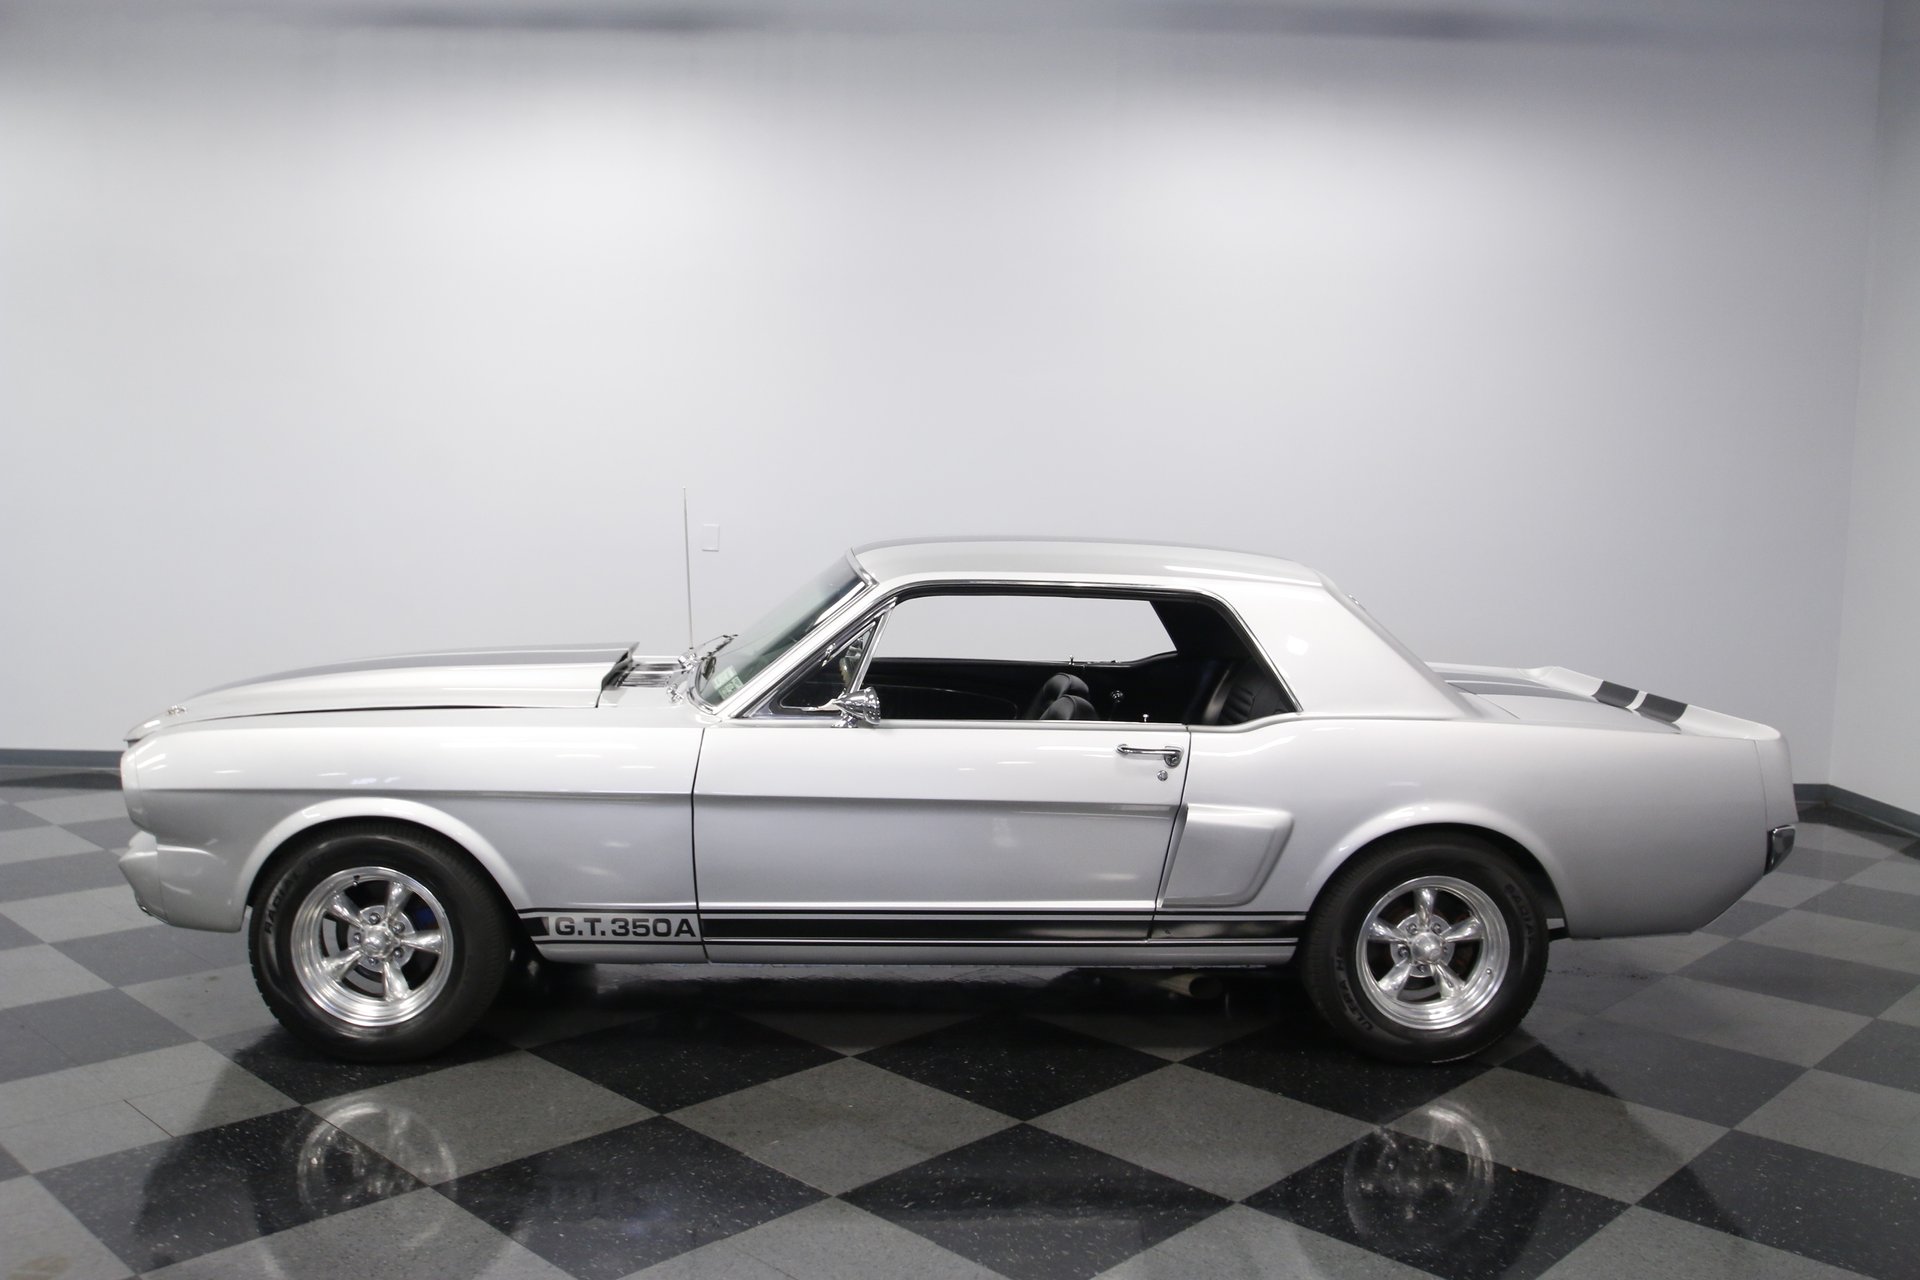 1965 ford mustang gt350 tribute